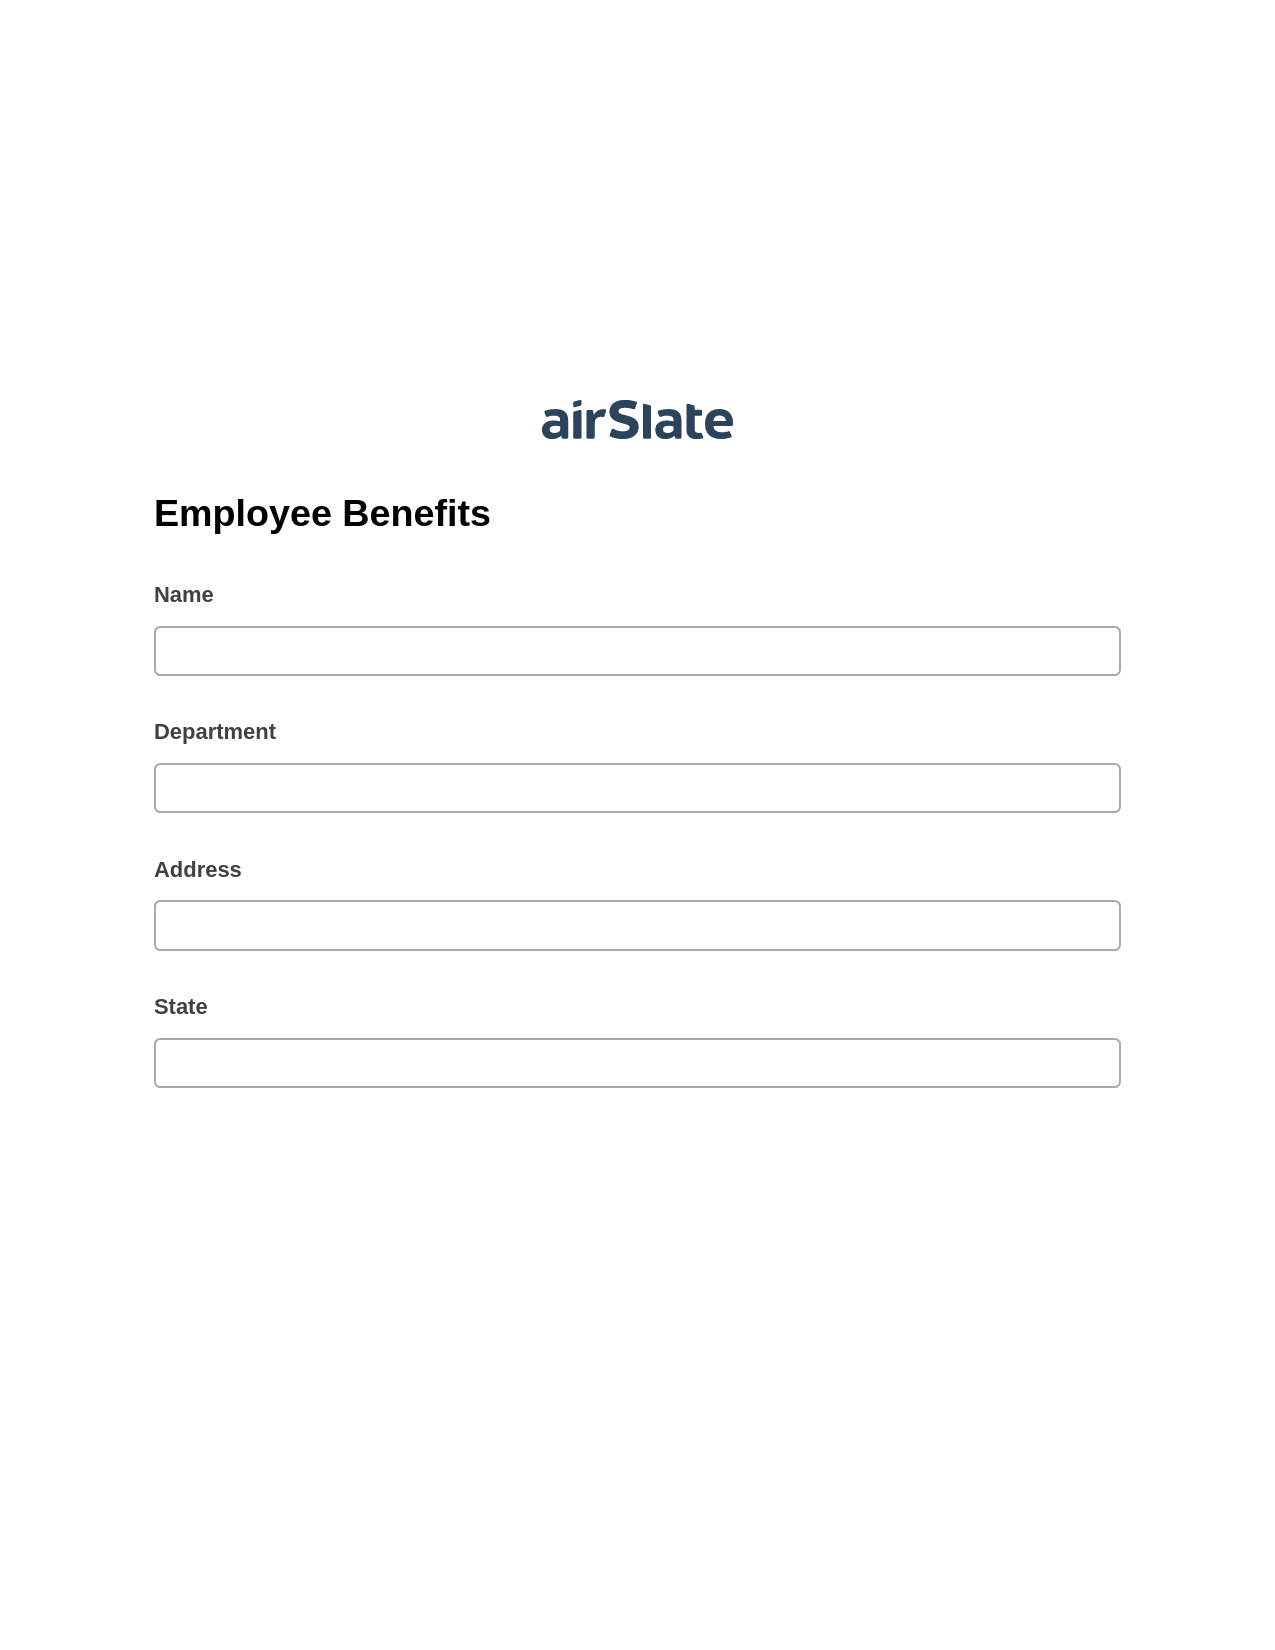 Employee Benefits Pre-fill from Salesforce Records with SOQL Bot, Roles Reminder Bot, Export to Smartsheet